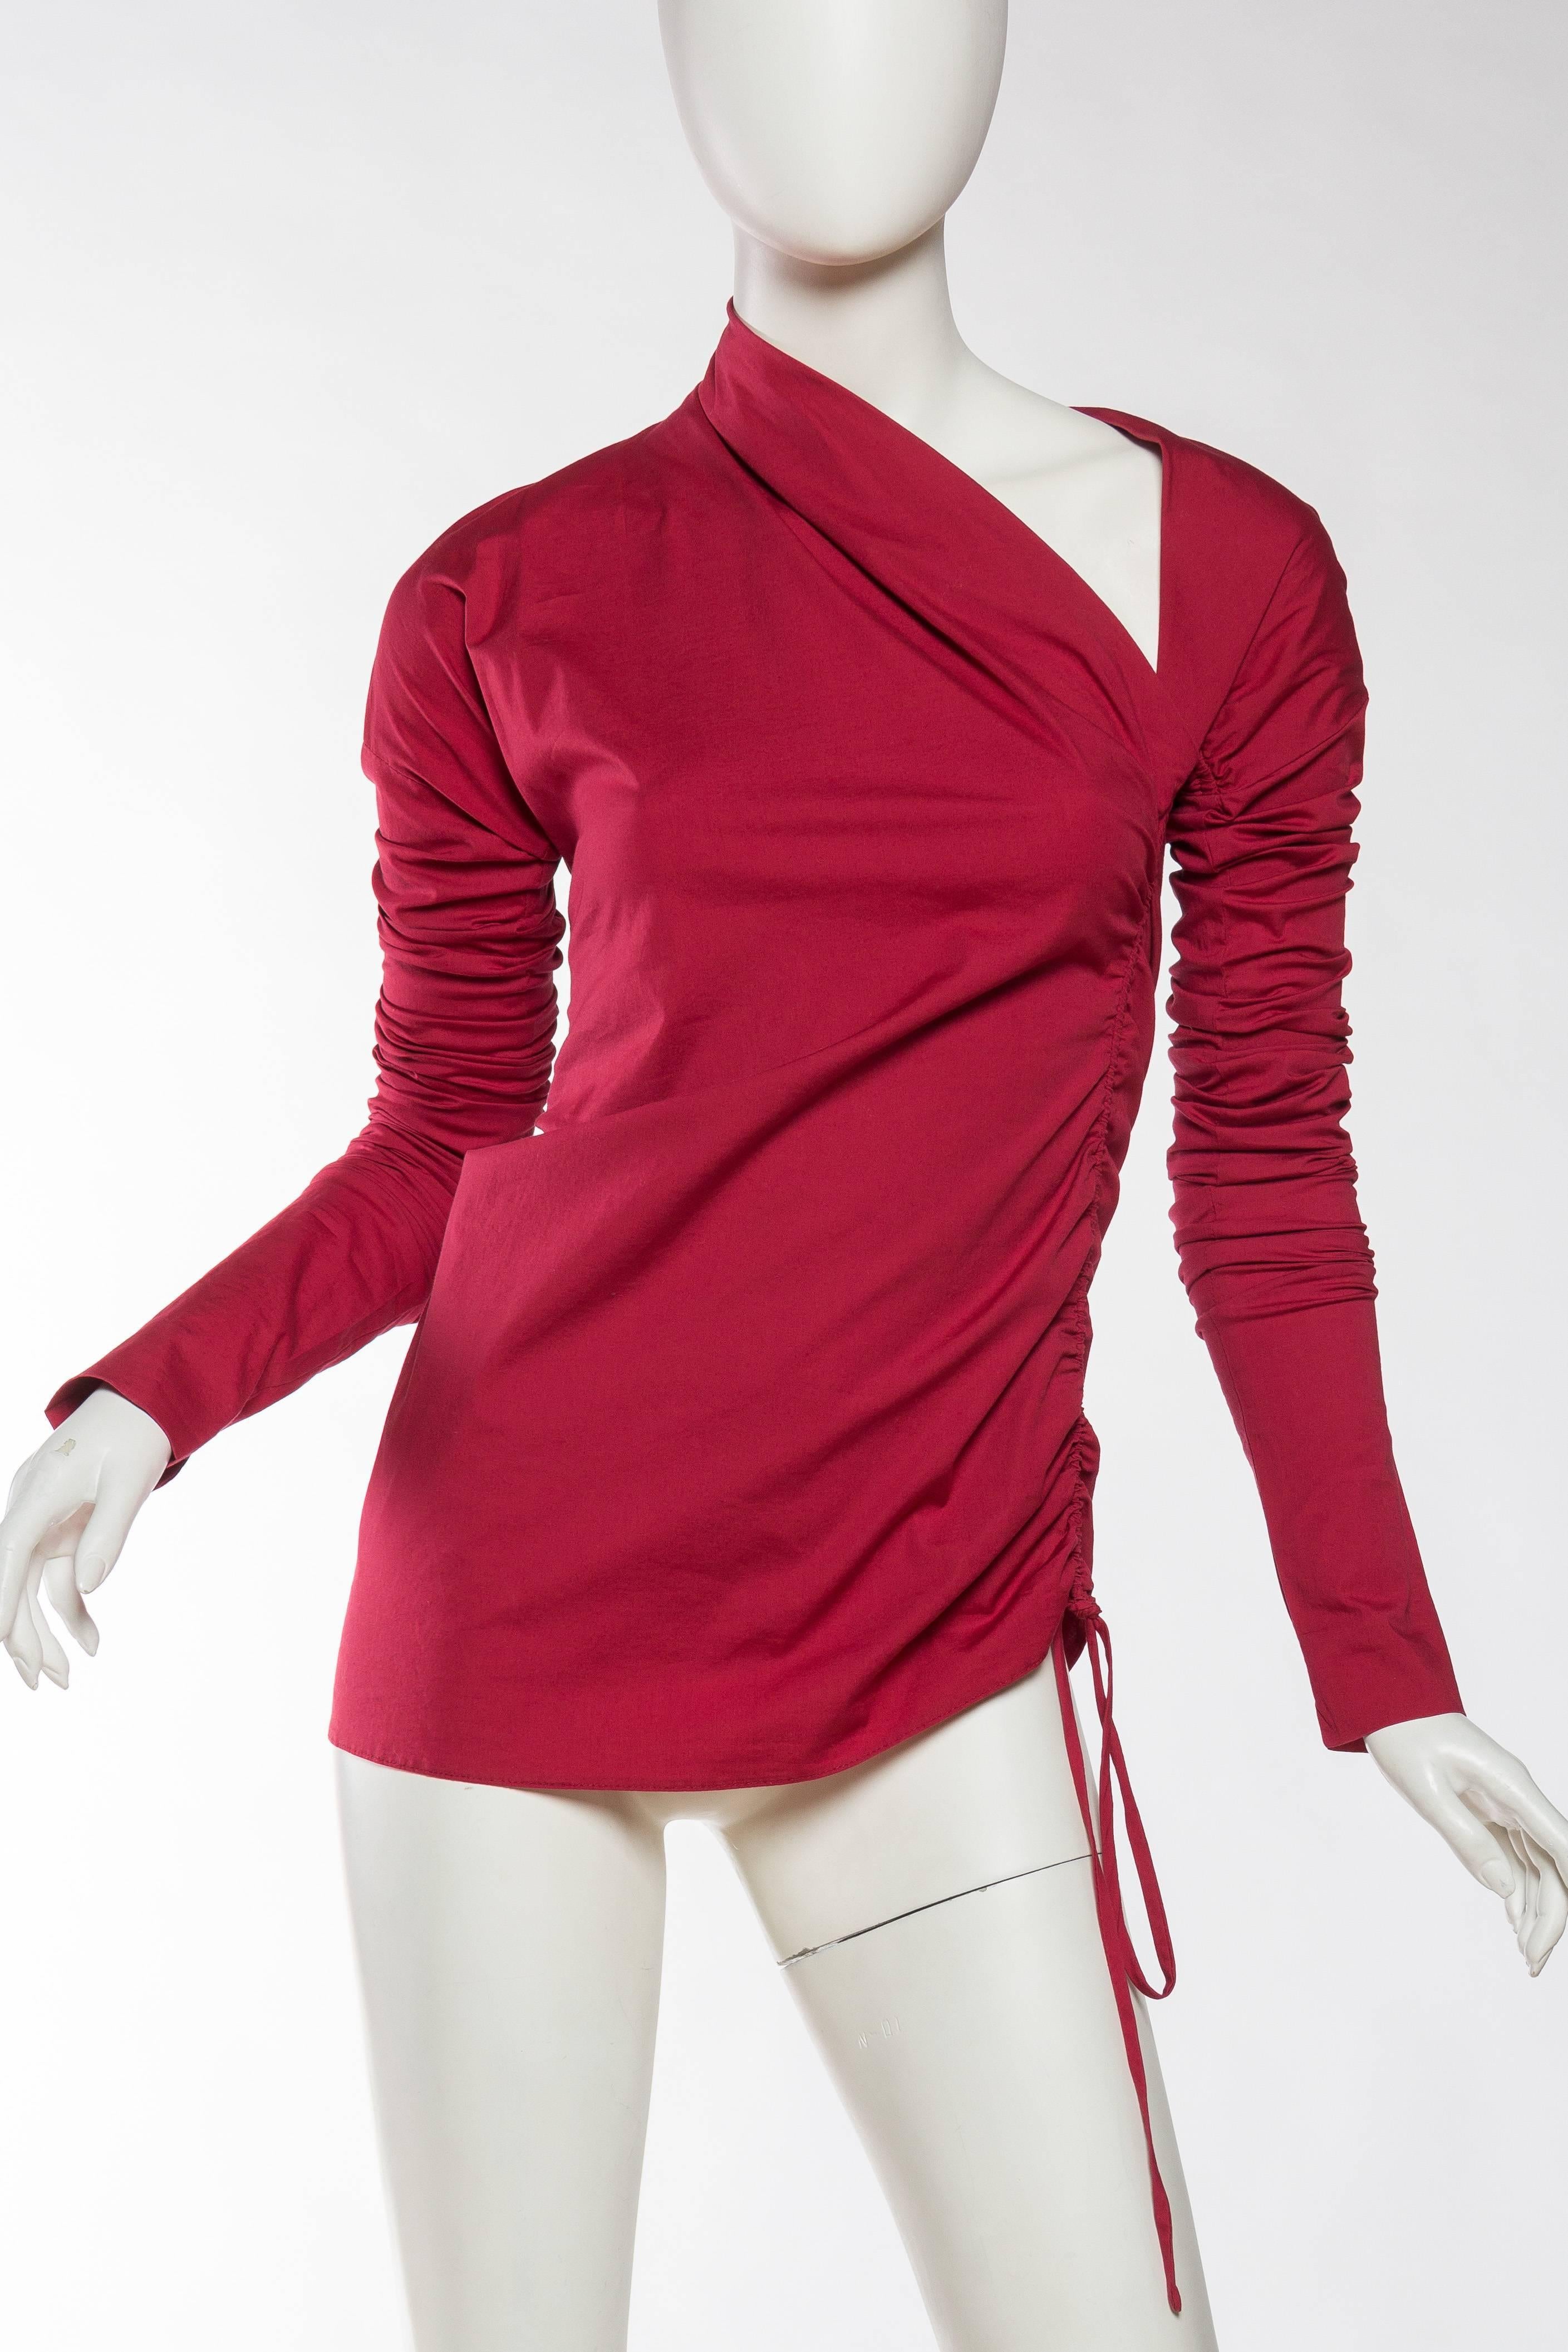 Asymmetrical ruching and a stretch to the fabric make this a killer top to remember.